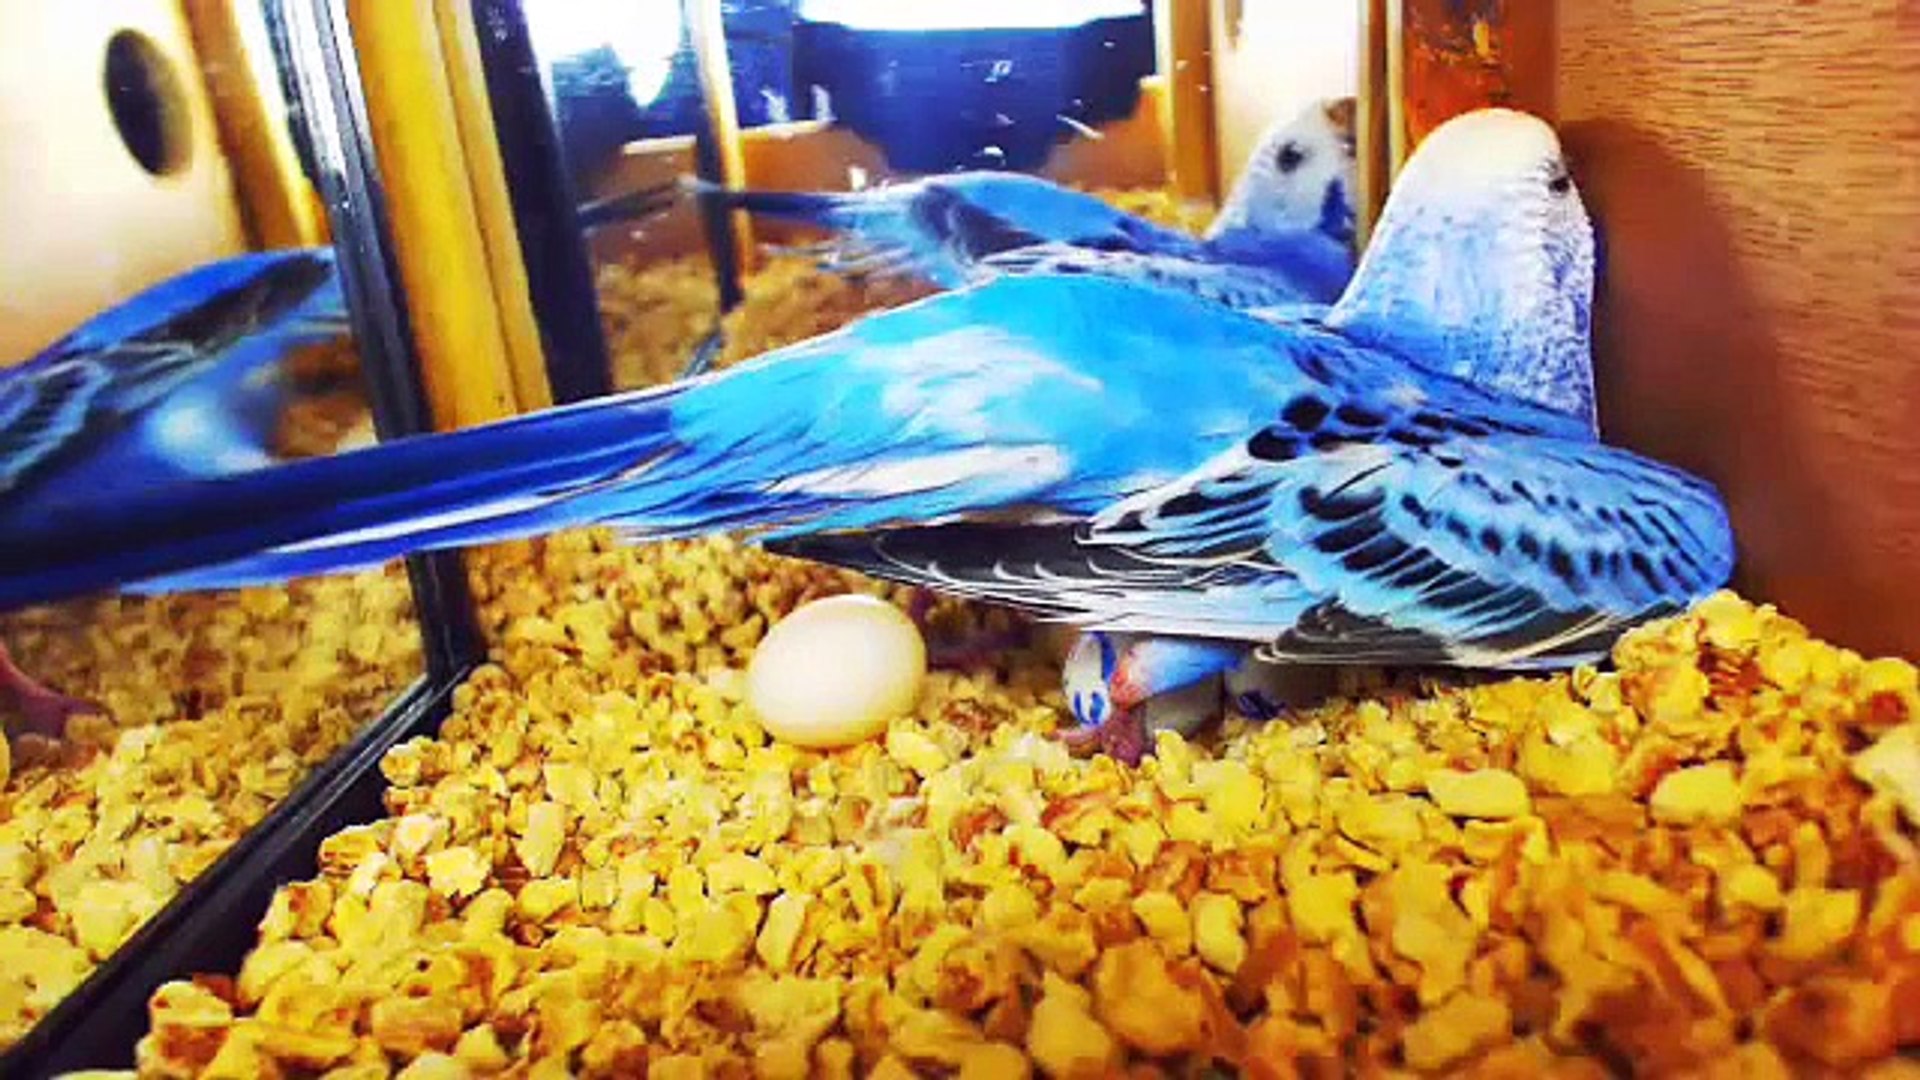 Parakeet Budgie Candi Laid # 7 Egg Oct 29th 2014 1:20PM